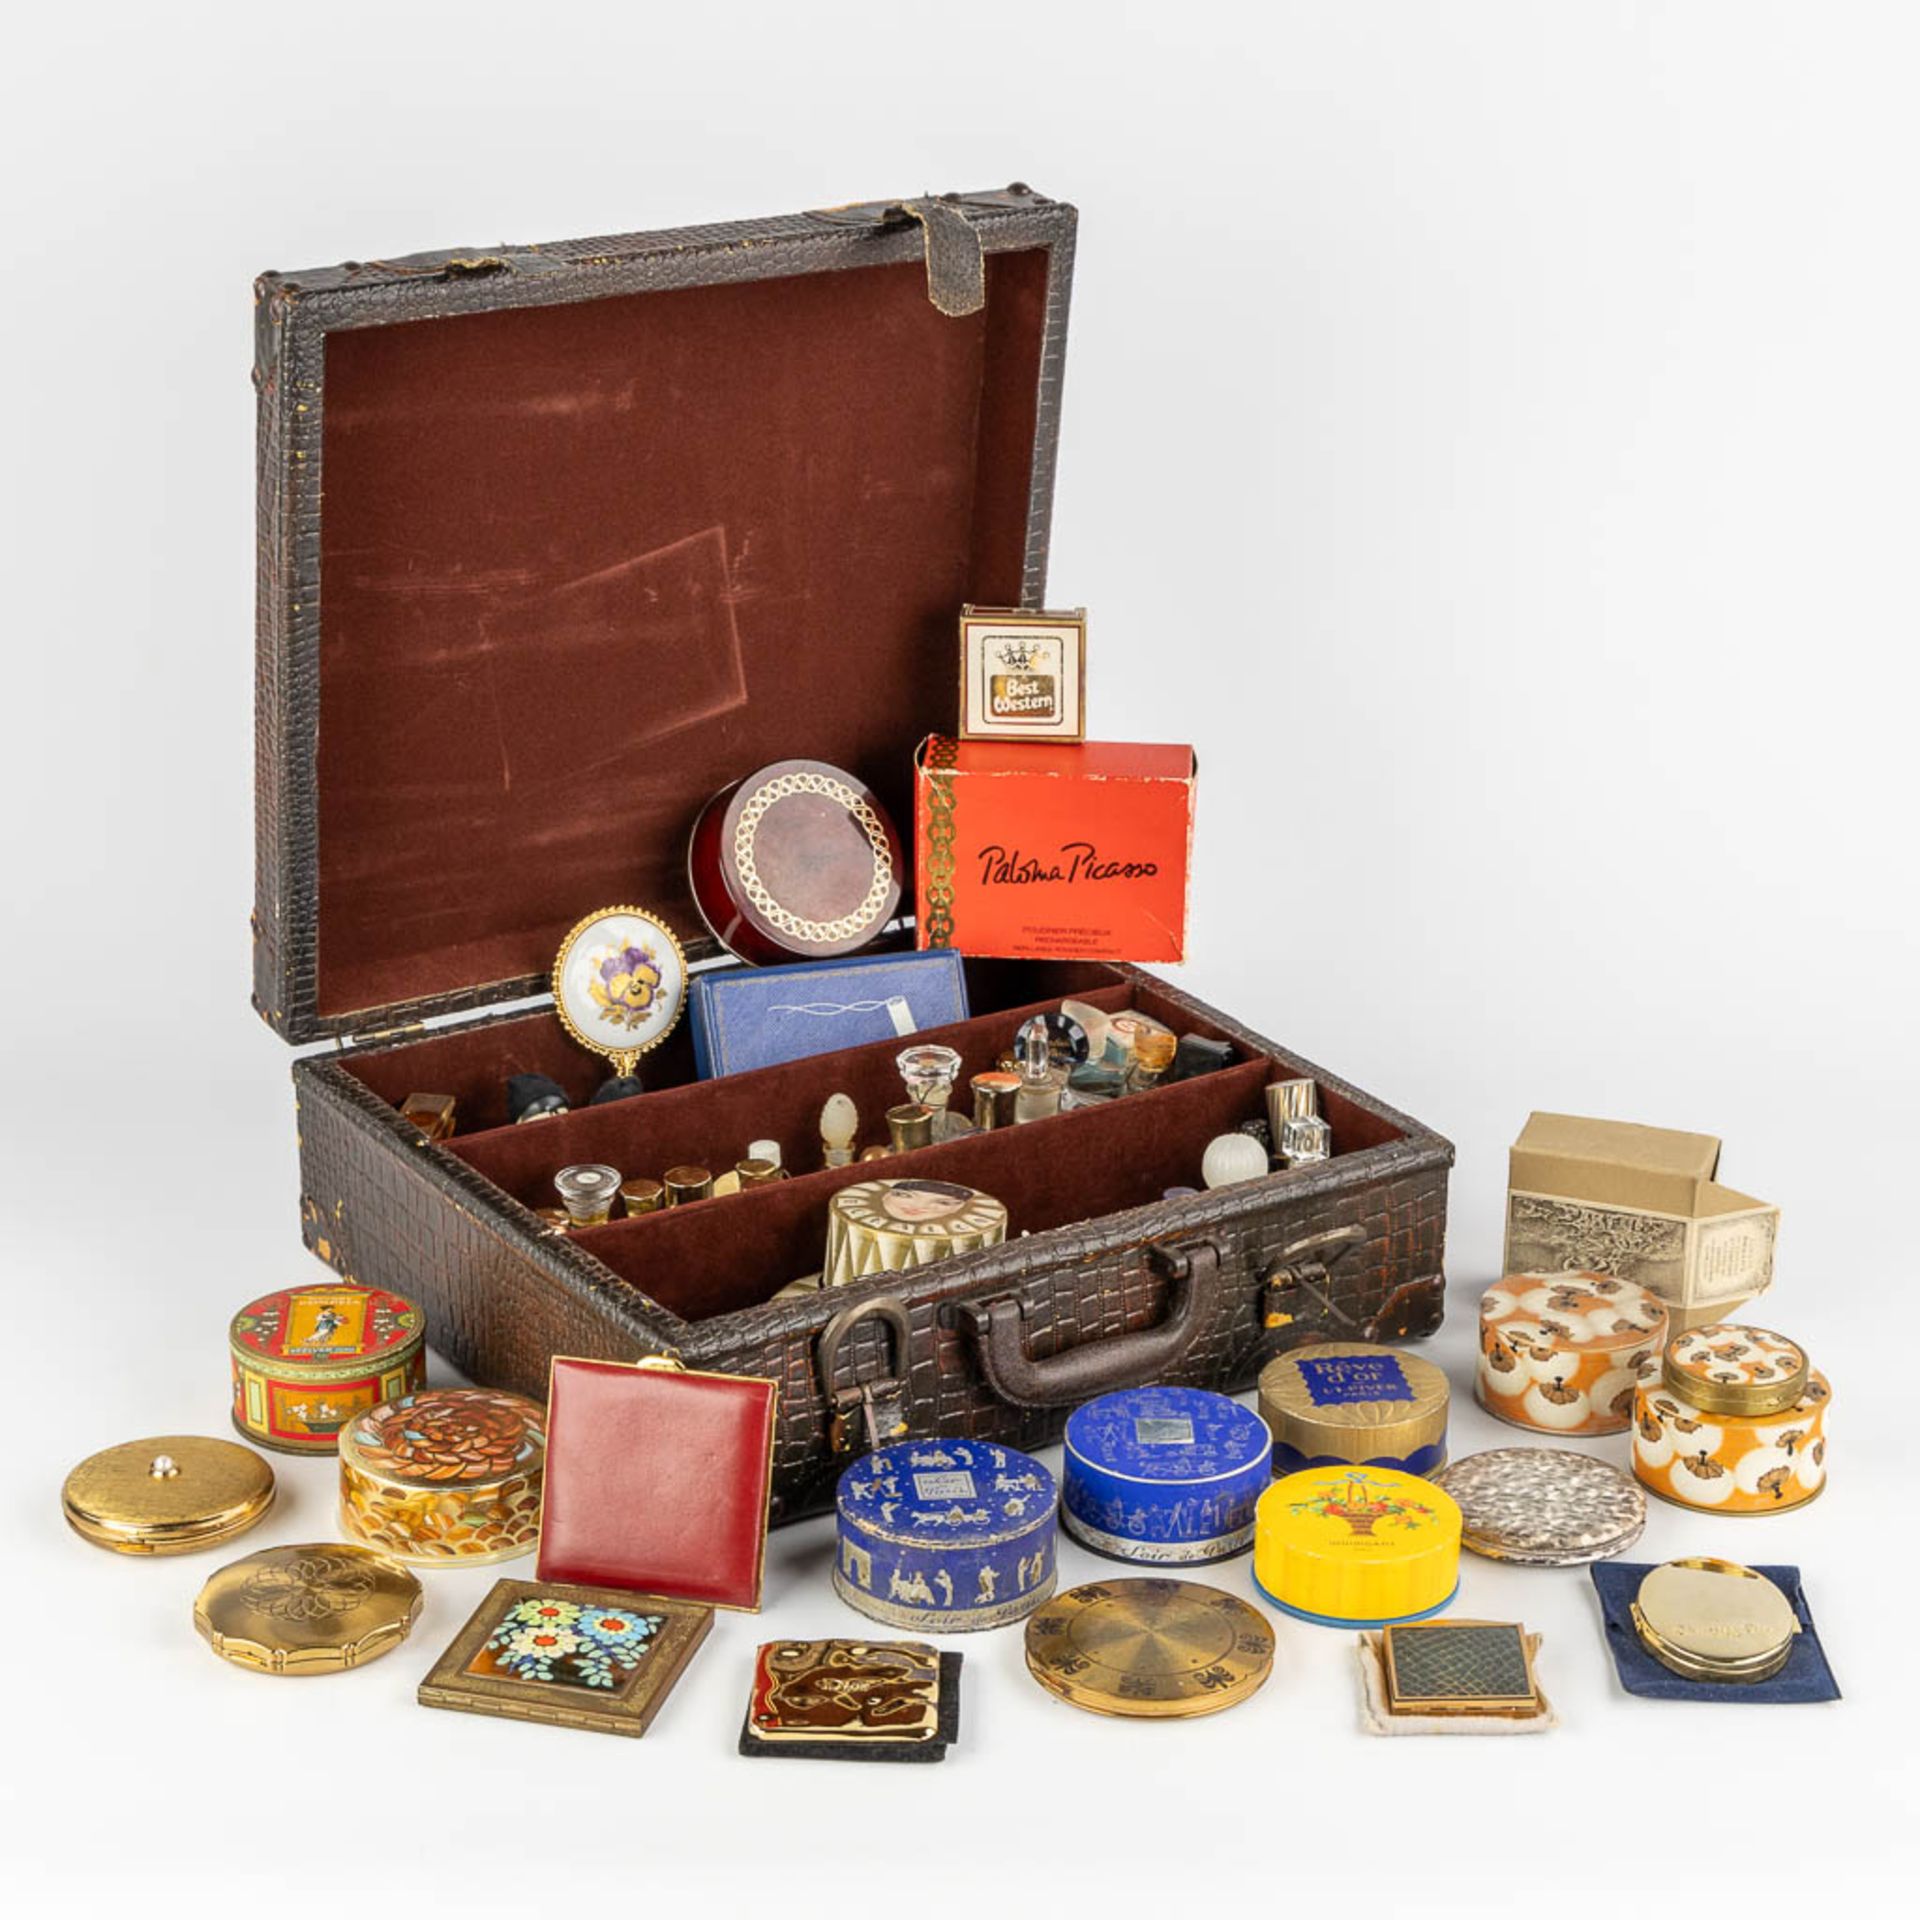 A large collection of perfume, vanity and powder boxes. Circa 1920-1940. (L:32 x W:35 x H:13 cm)